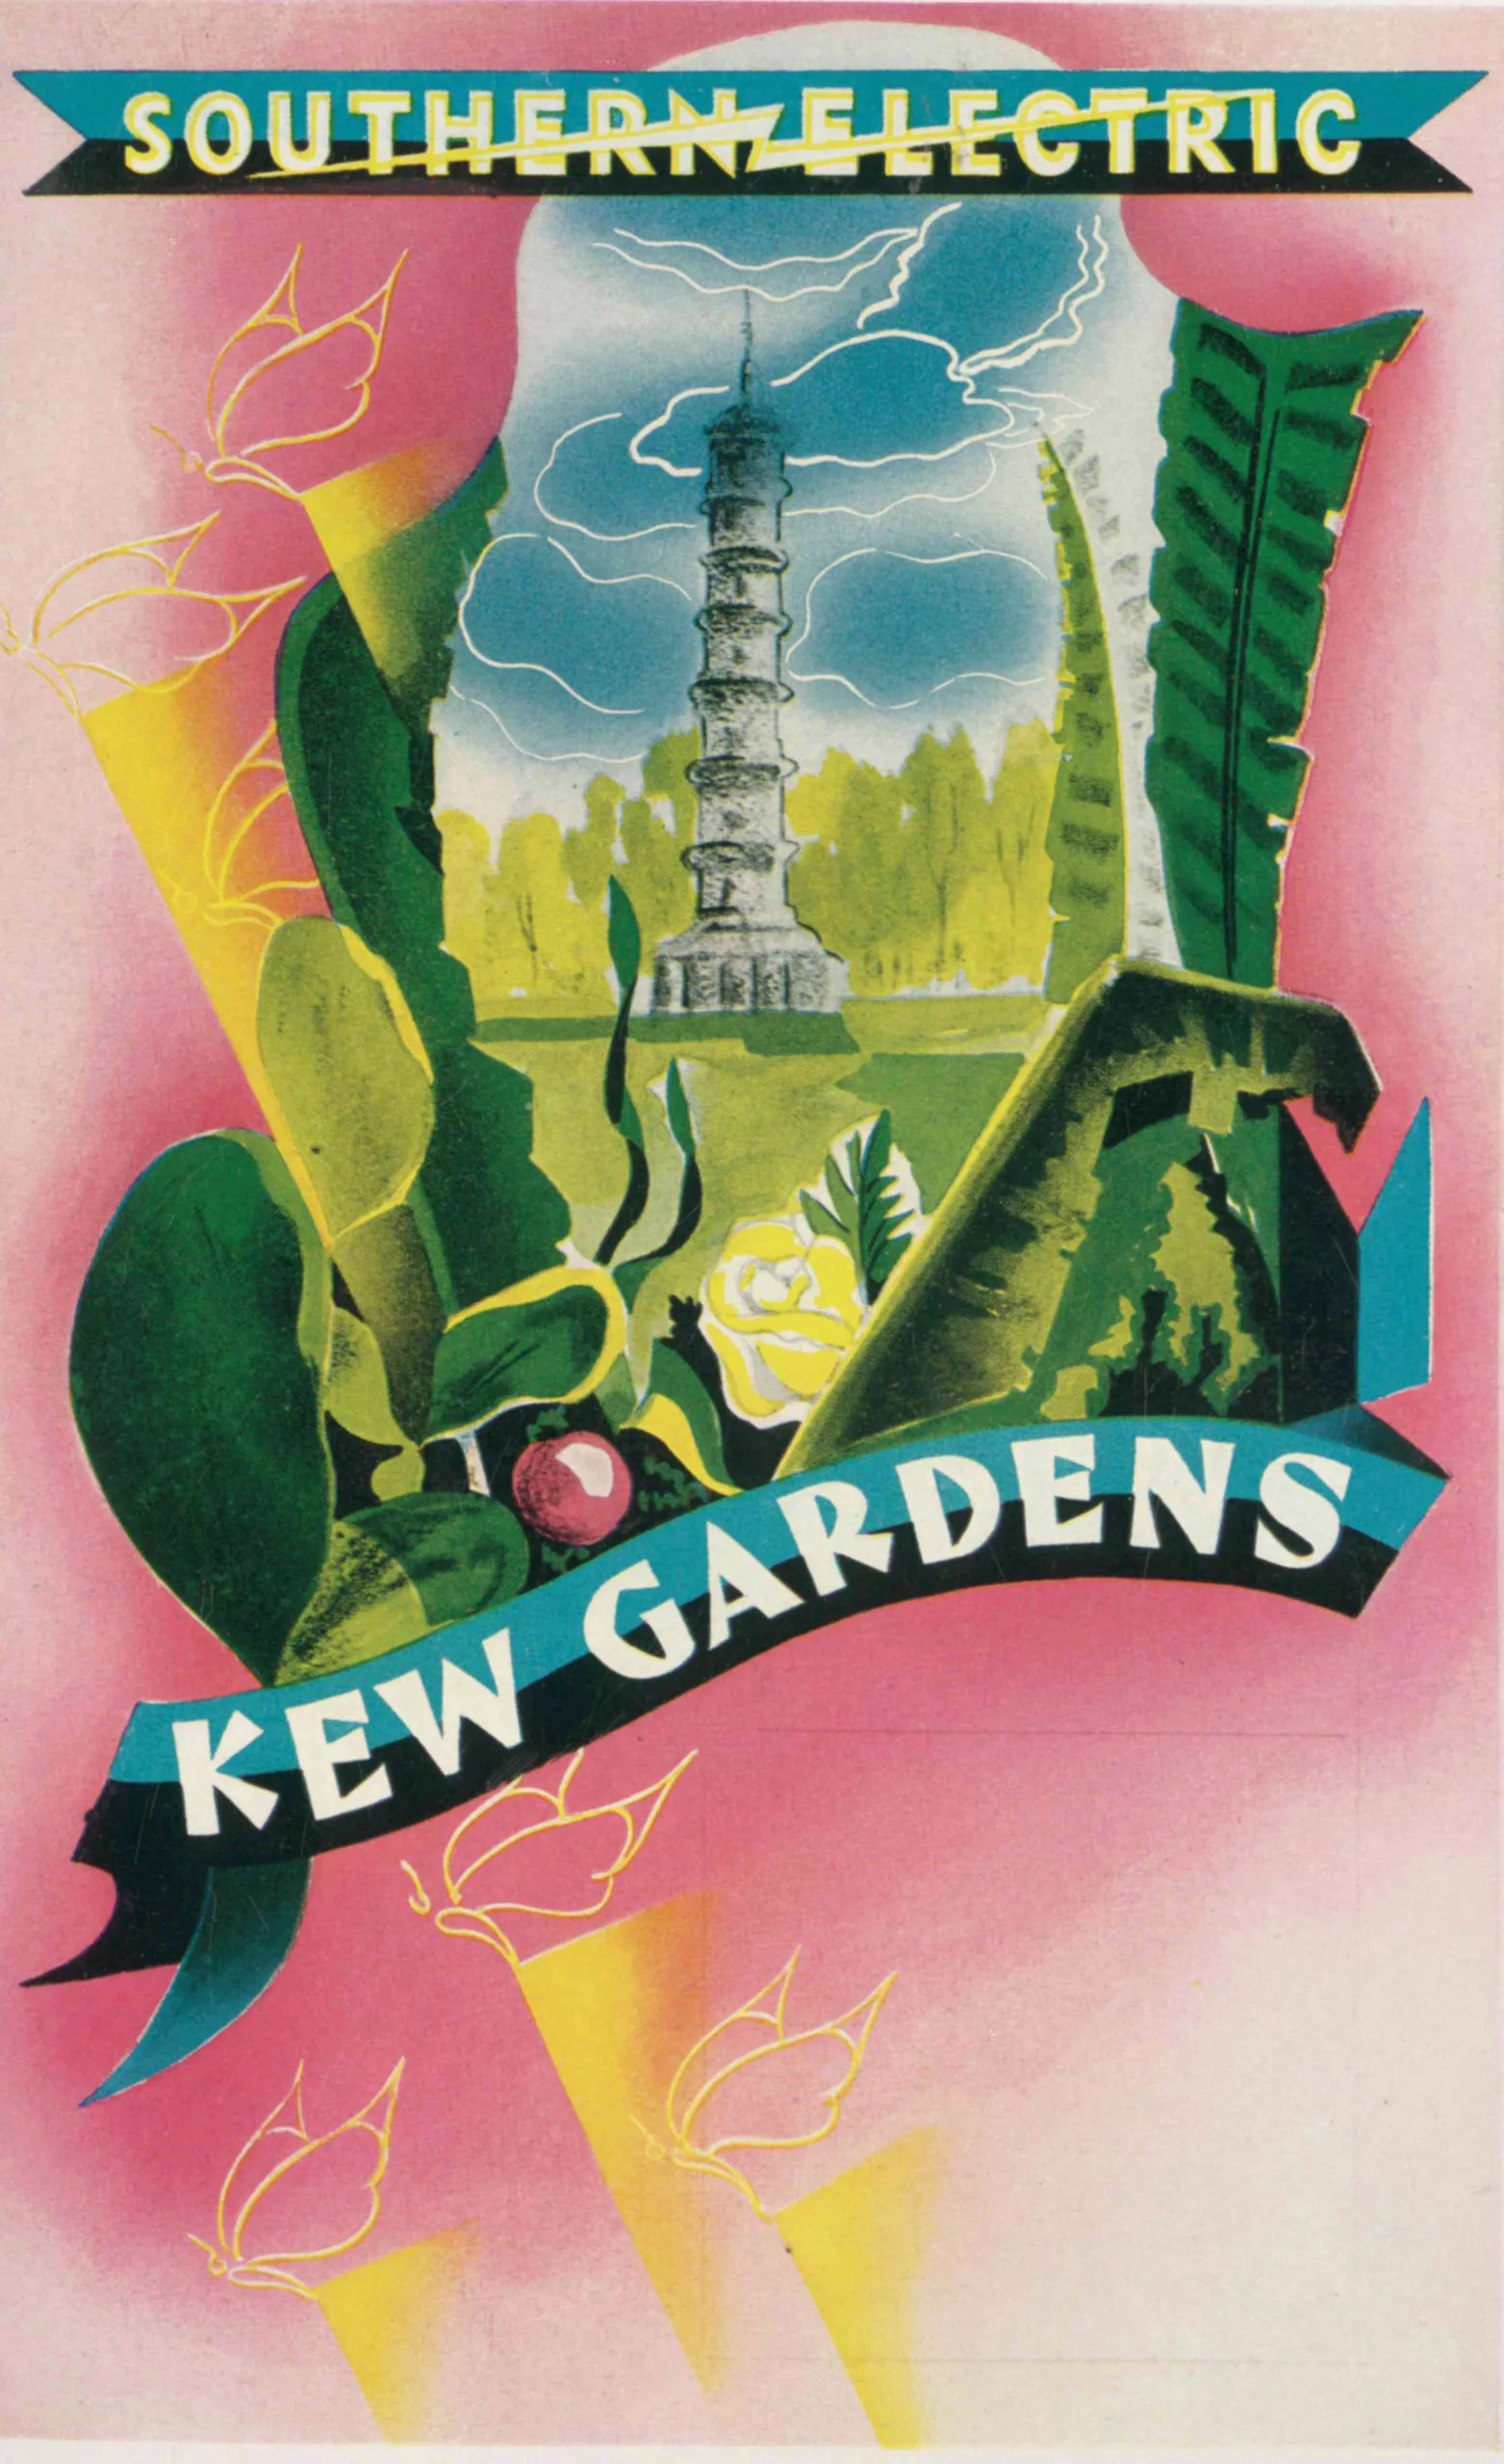 Kew Gardens Poster deisgned by George Plante